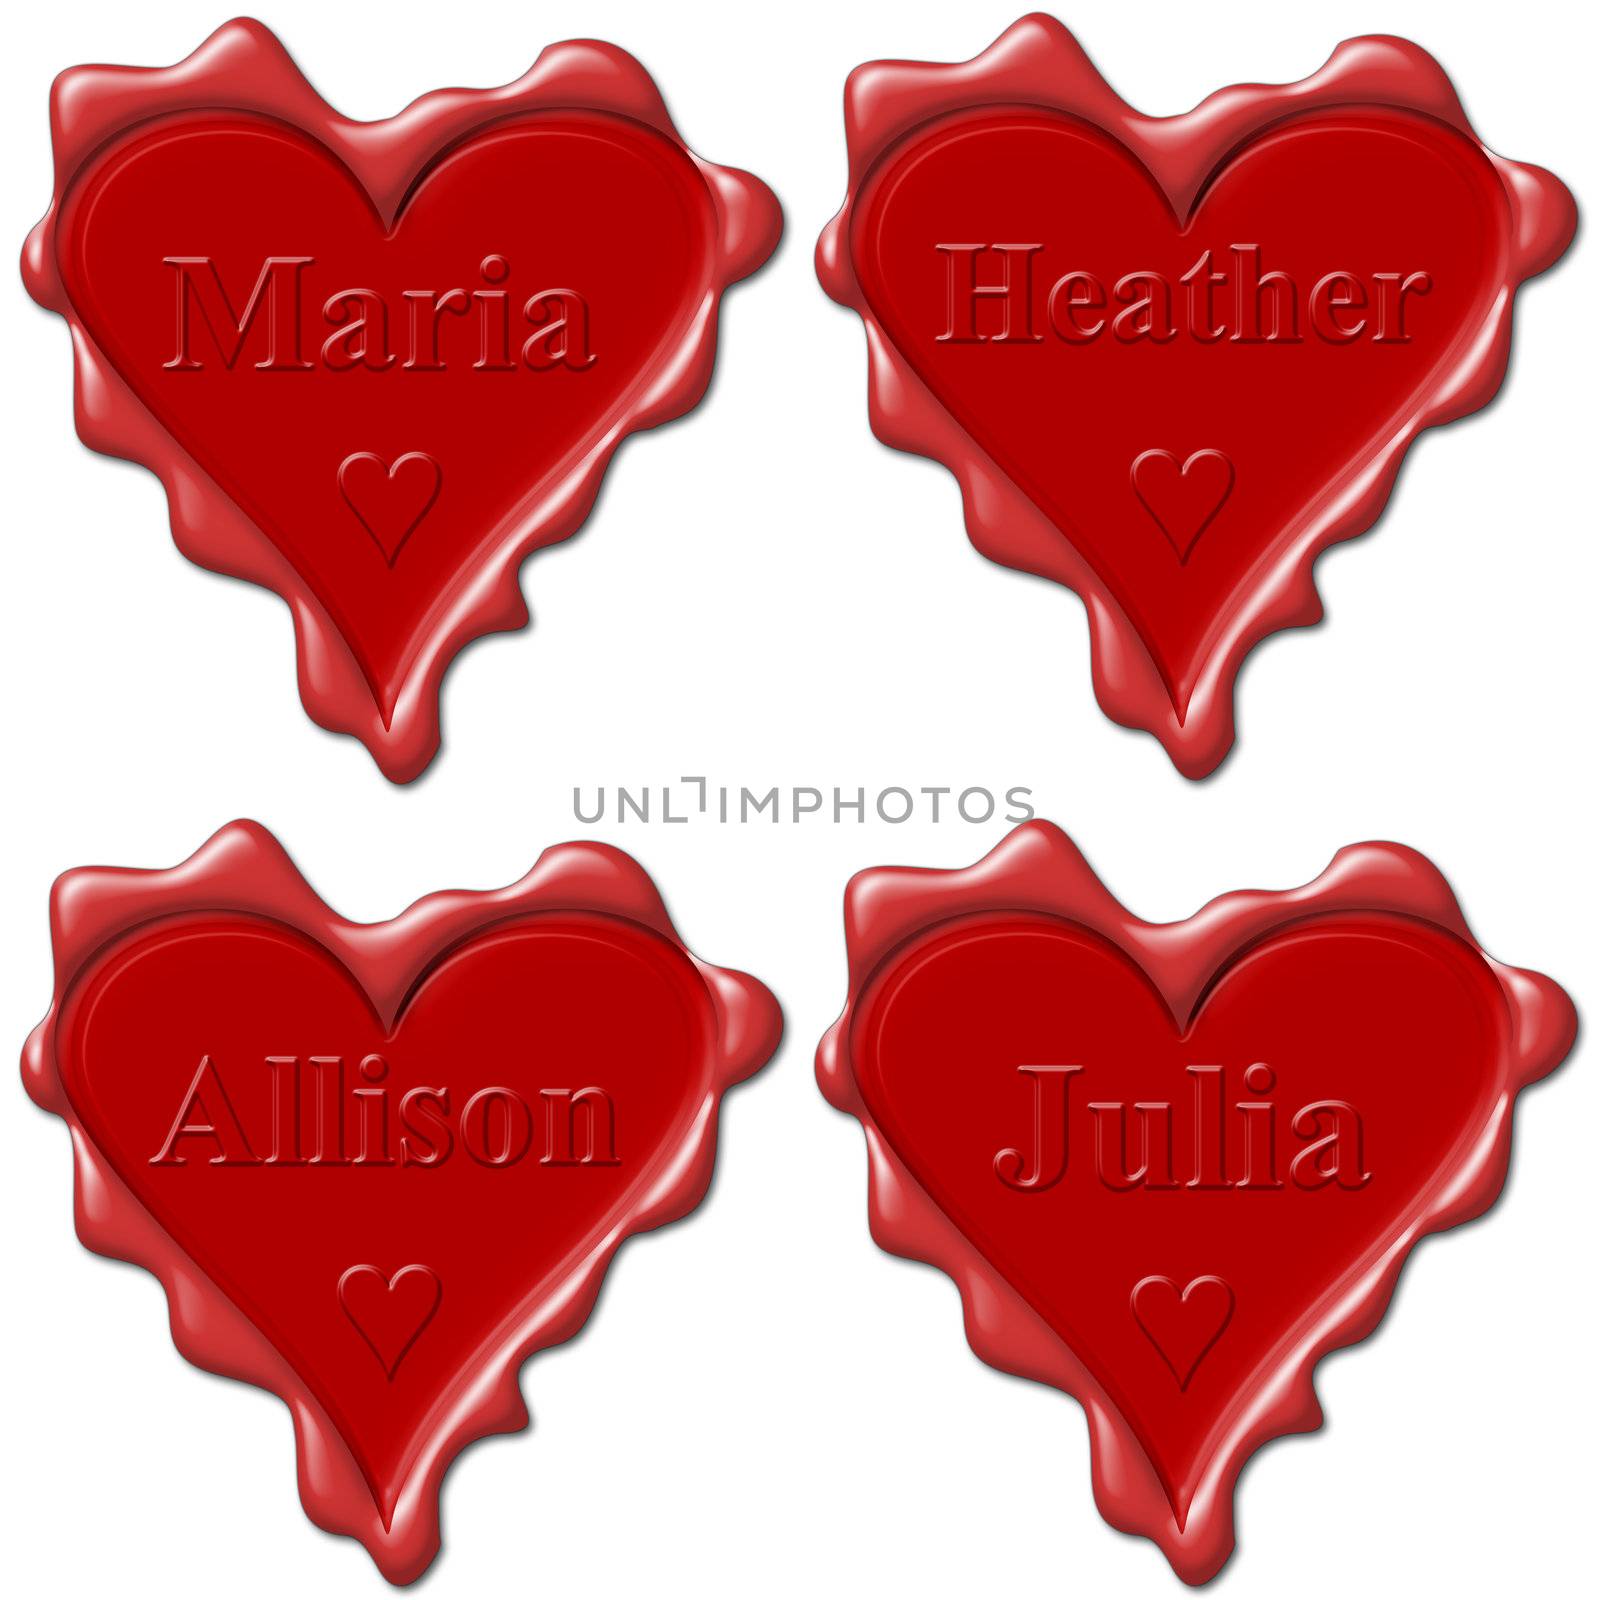 Valentine love hearts with names: Maria, Heather, Allison, Julia by mozzyb